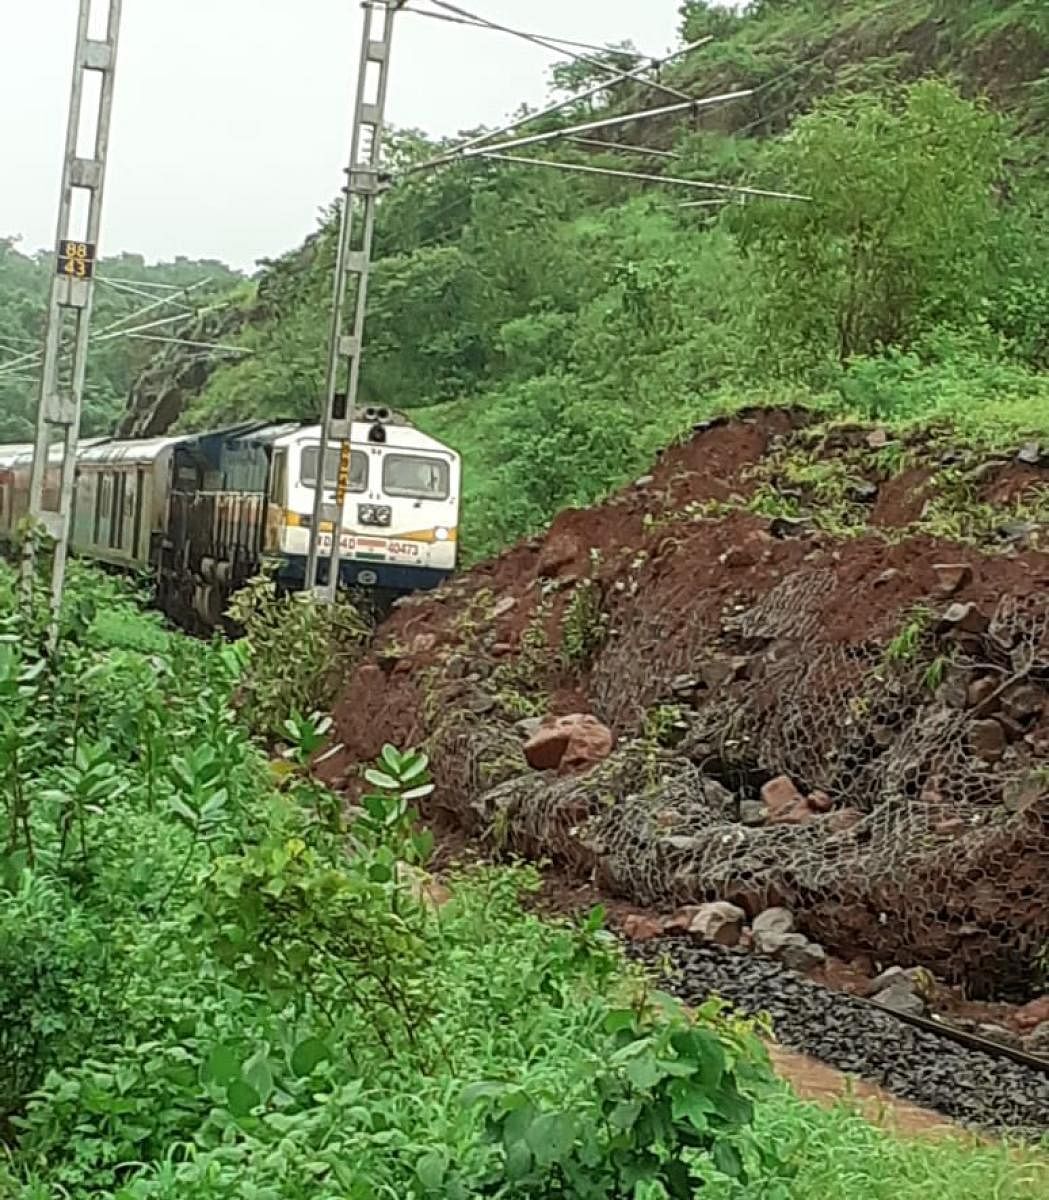 Hazrath Nizamuddin-Madgaon Rajdhani Express train (No 22414) crew and the patrolman stopped the train in the wee hours of Sunday just before a landslide on the track between Apte and Jite in Mumbai Division of Central Railway (Raigad district, Maharashtra